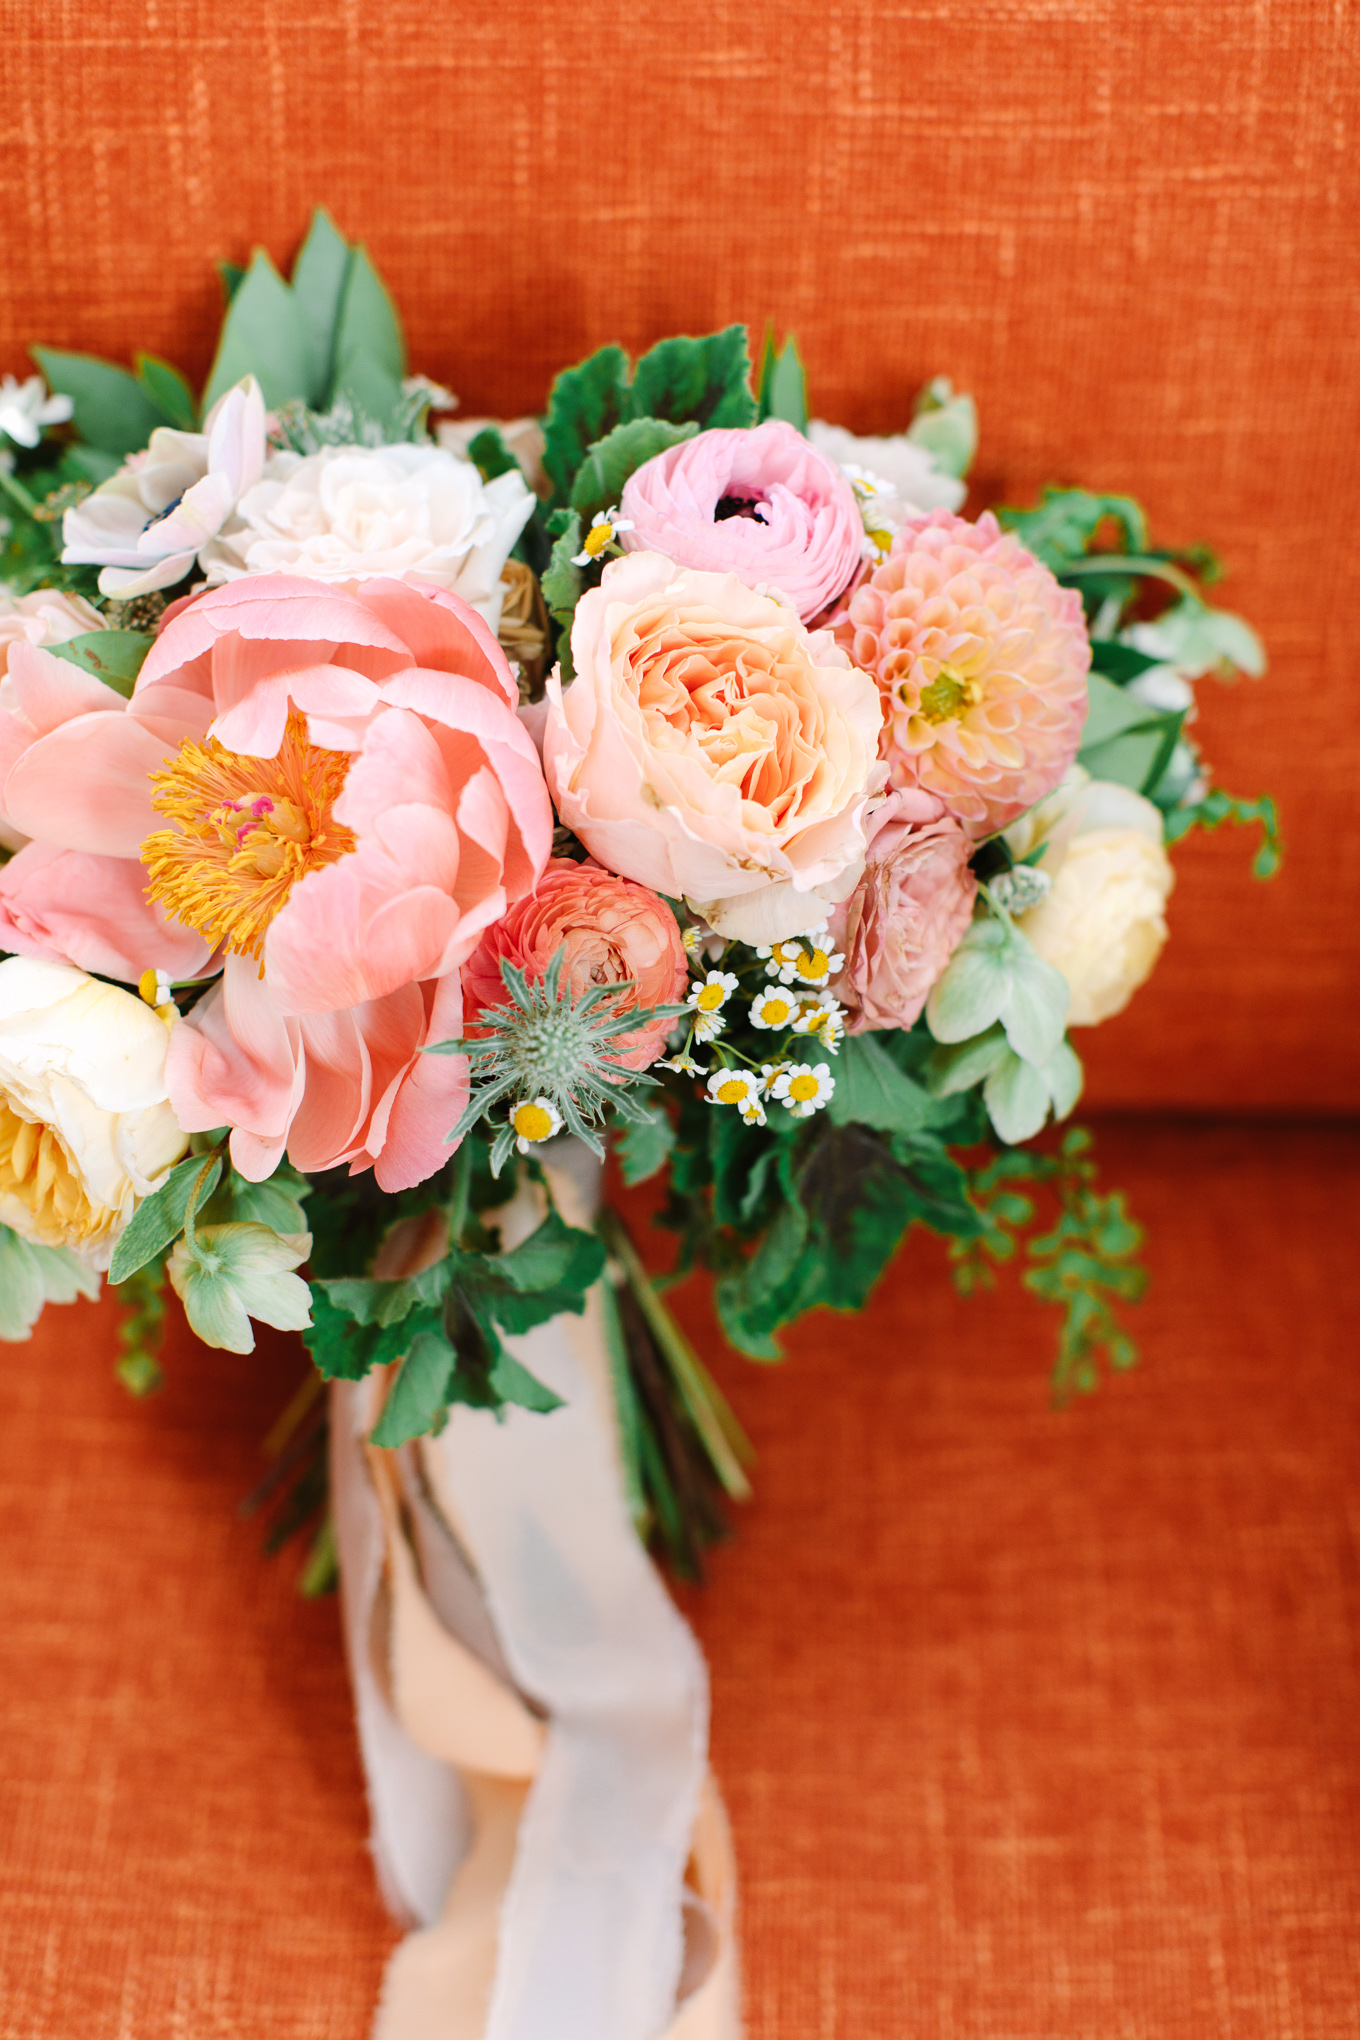 Pink peony and peach bouquet at The Ruby Street | Beautiful bridal bouquet inspiration and advice | Colorful and elevated wedding photography for fun-loving couples in Southern California | #weddingflowers #weddingbouquet #bridebouquet #bouquetideas #uniquebouquet   Source: Mary Costa Photography | Los Angeles